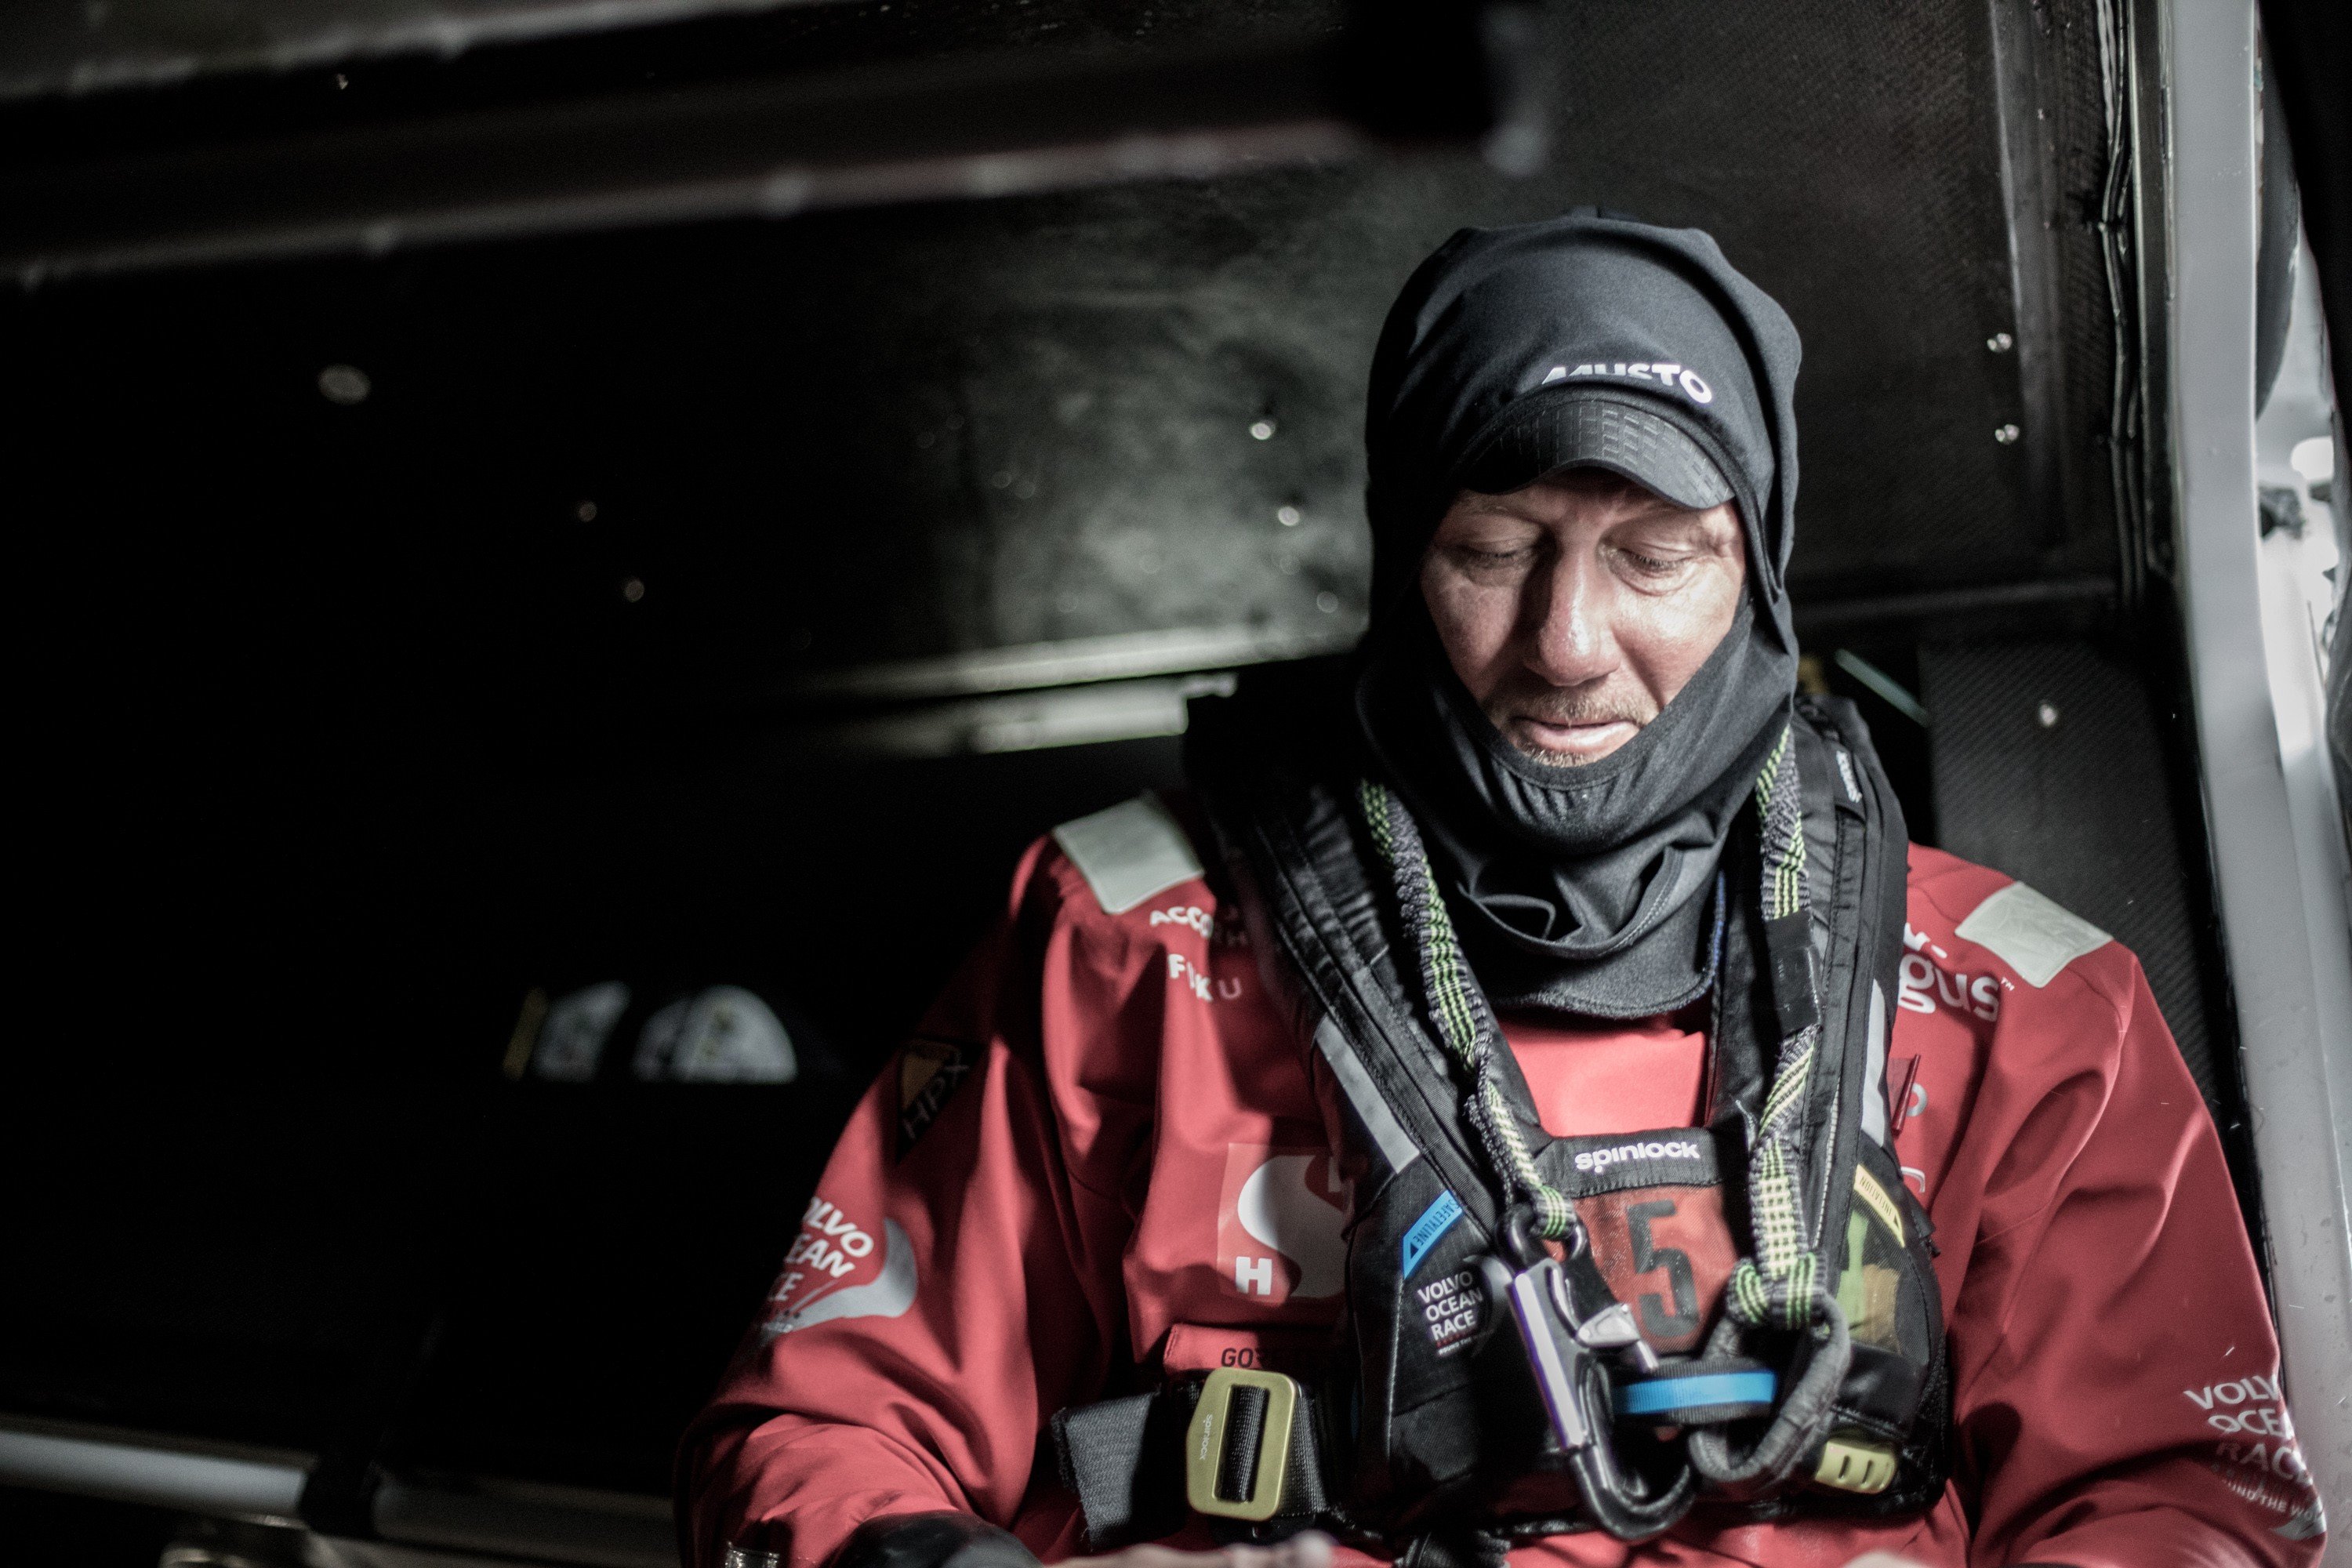 John Fisher takes a rest during the Ocean Race in March 2018. Photo: Ocean Race